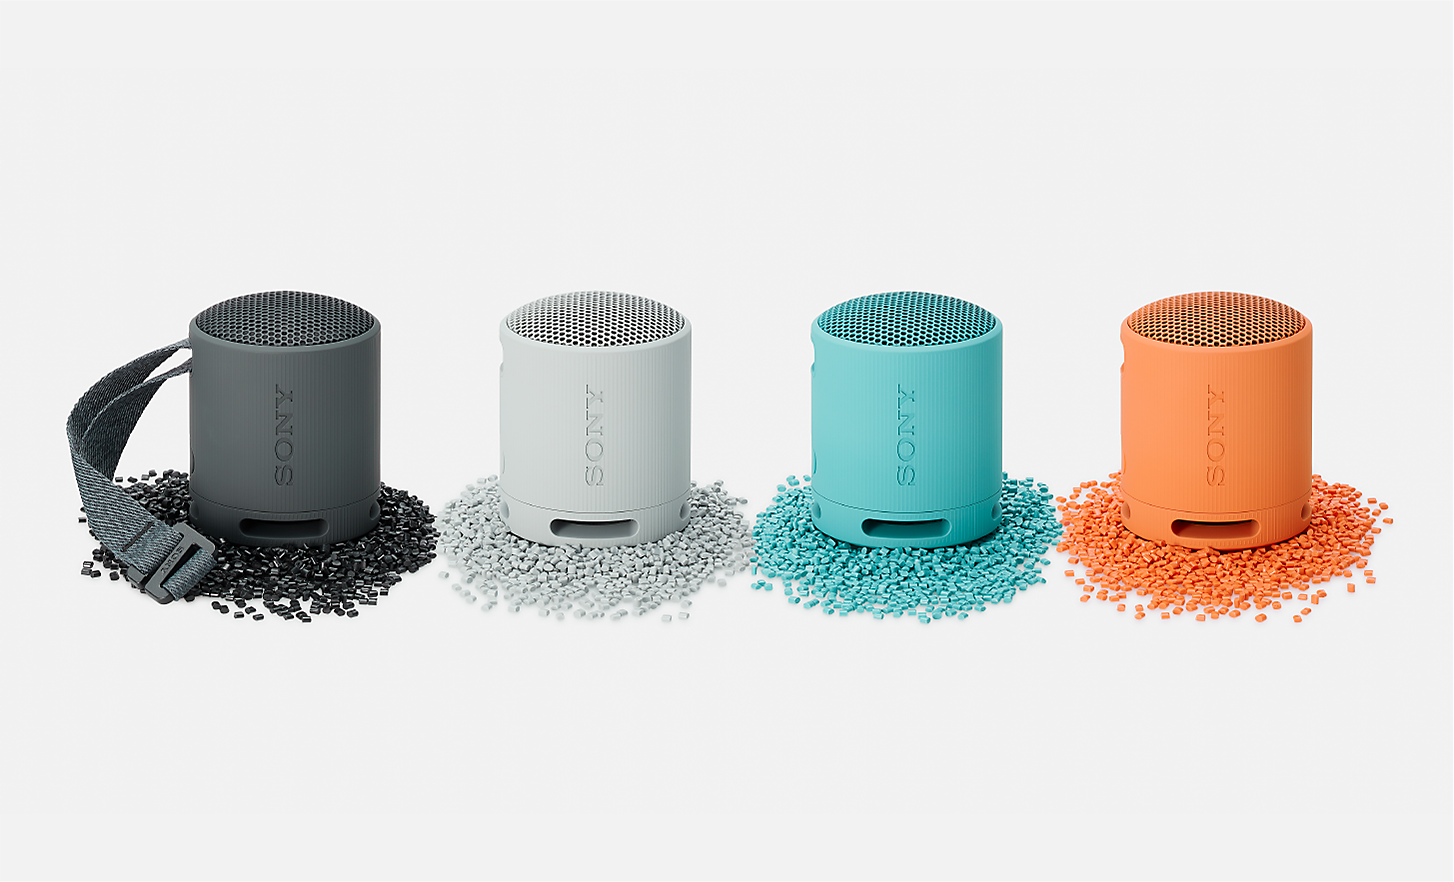 Image of the black, white, blue and orange SRS-XB100 speakers siting on granules of matching coloured plastic